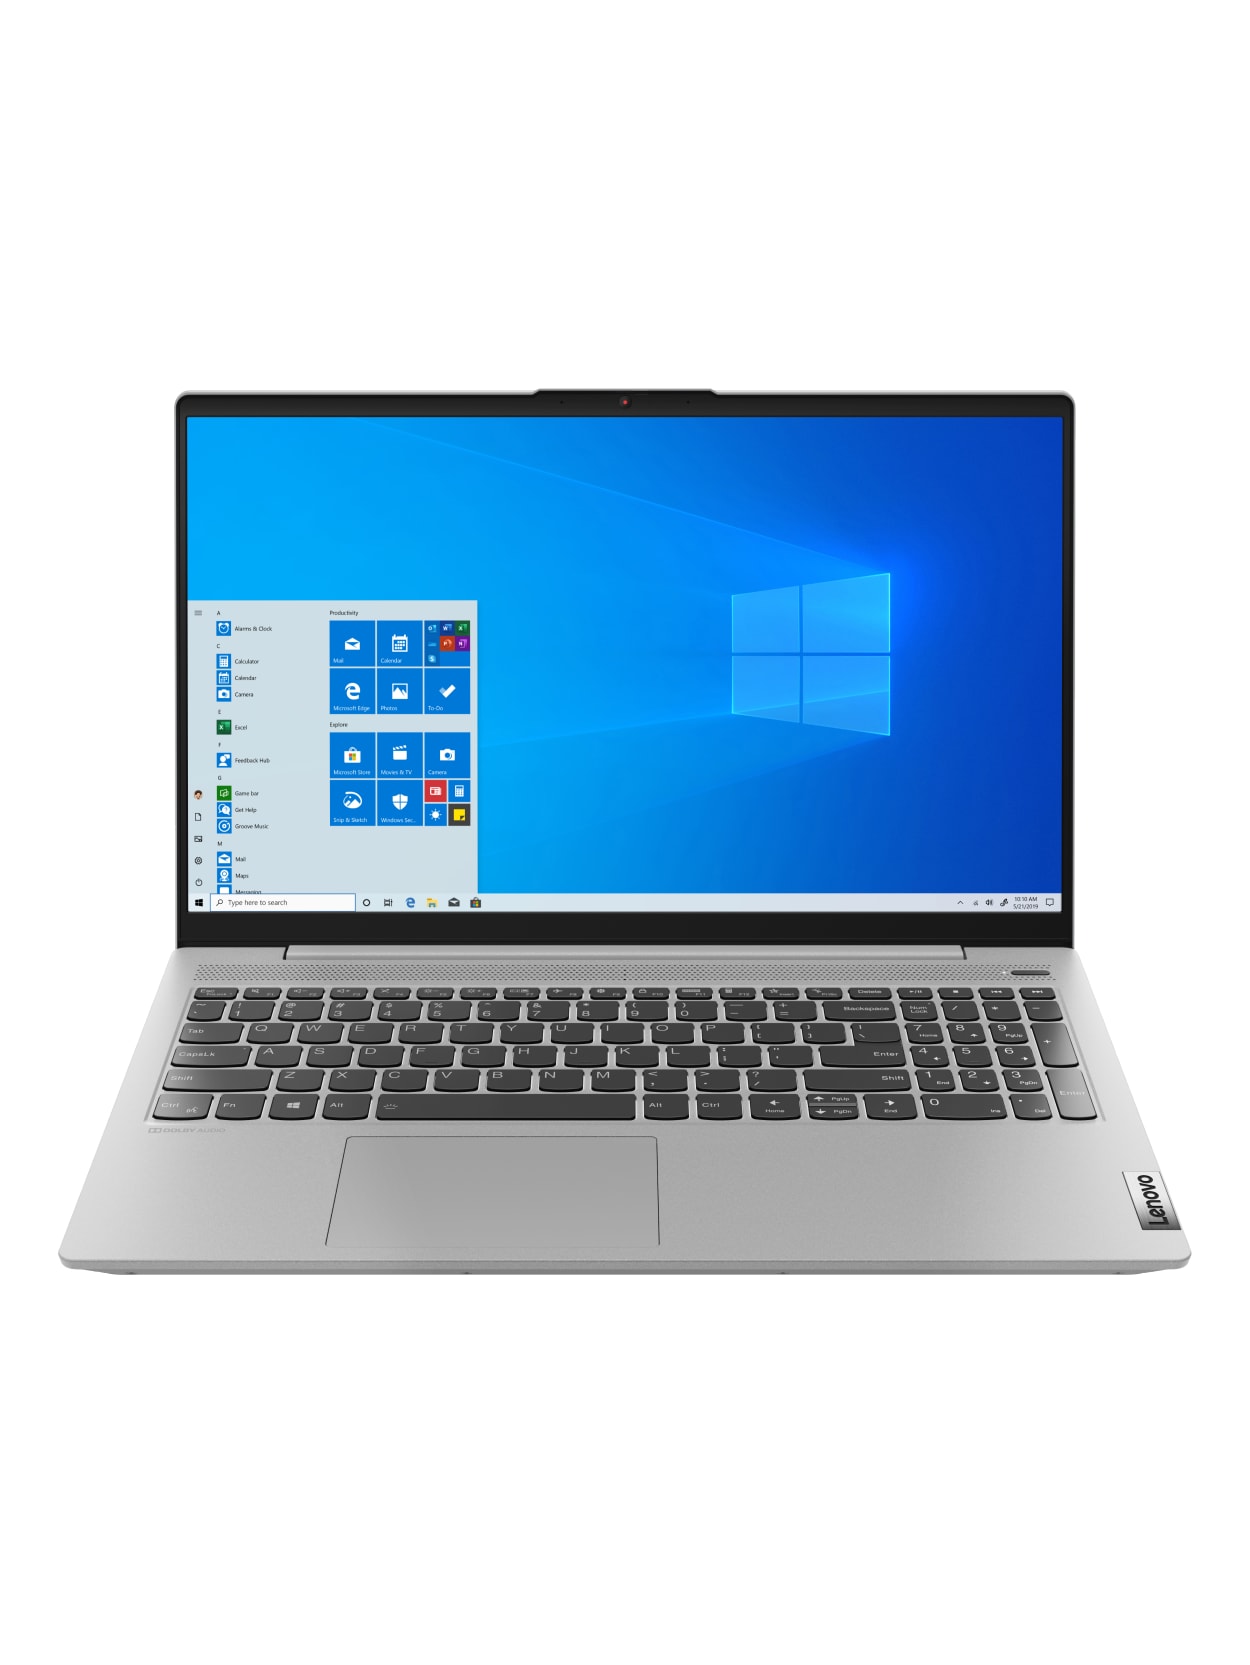 $529 Lenovo® IdeaPad 5 Laptop, 15.6" Screen, AMD Ryzen 7, 8GB Memory, 256GB Solid State Drive, Wi-Fi 6, Windows® 10, 81YQ0003US At Office Depot Today Only.